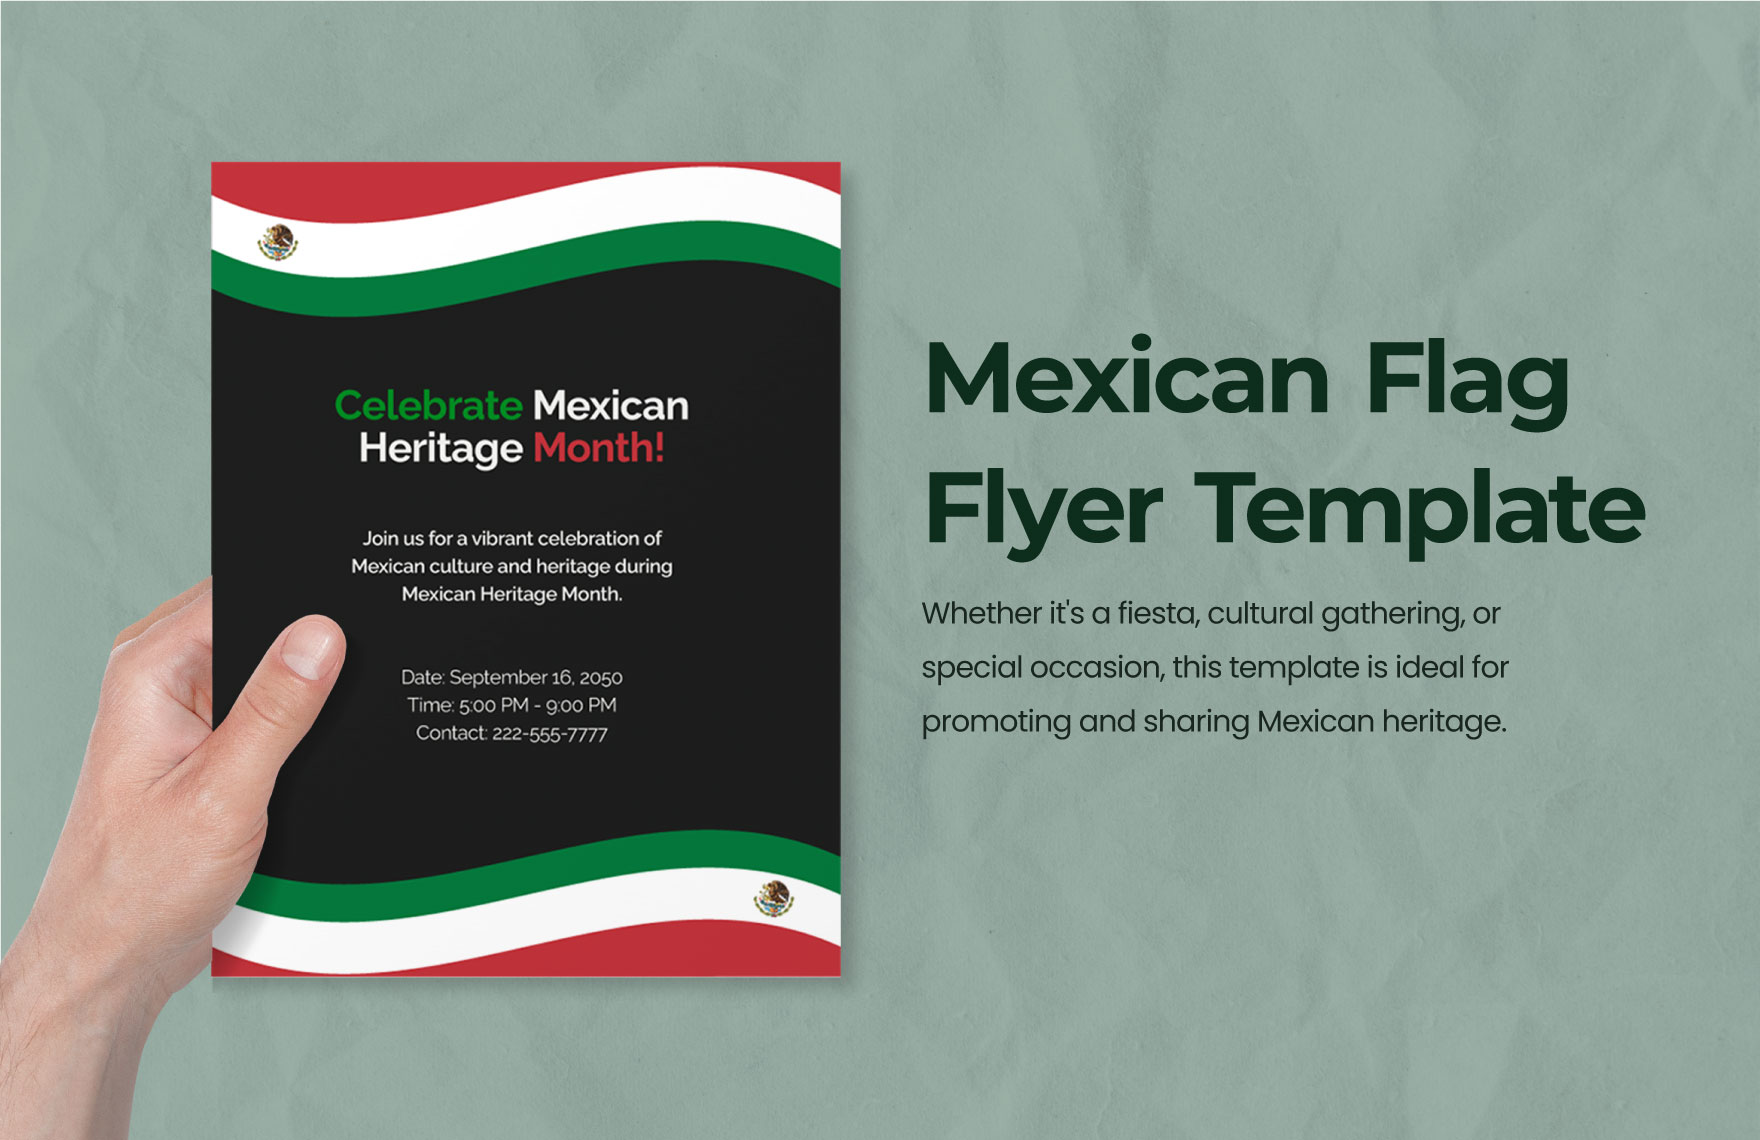 Mexican Flag Flyer Template